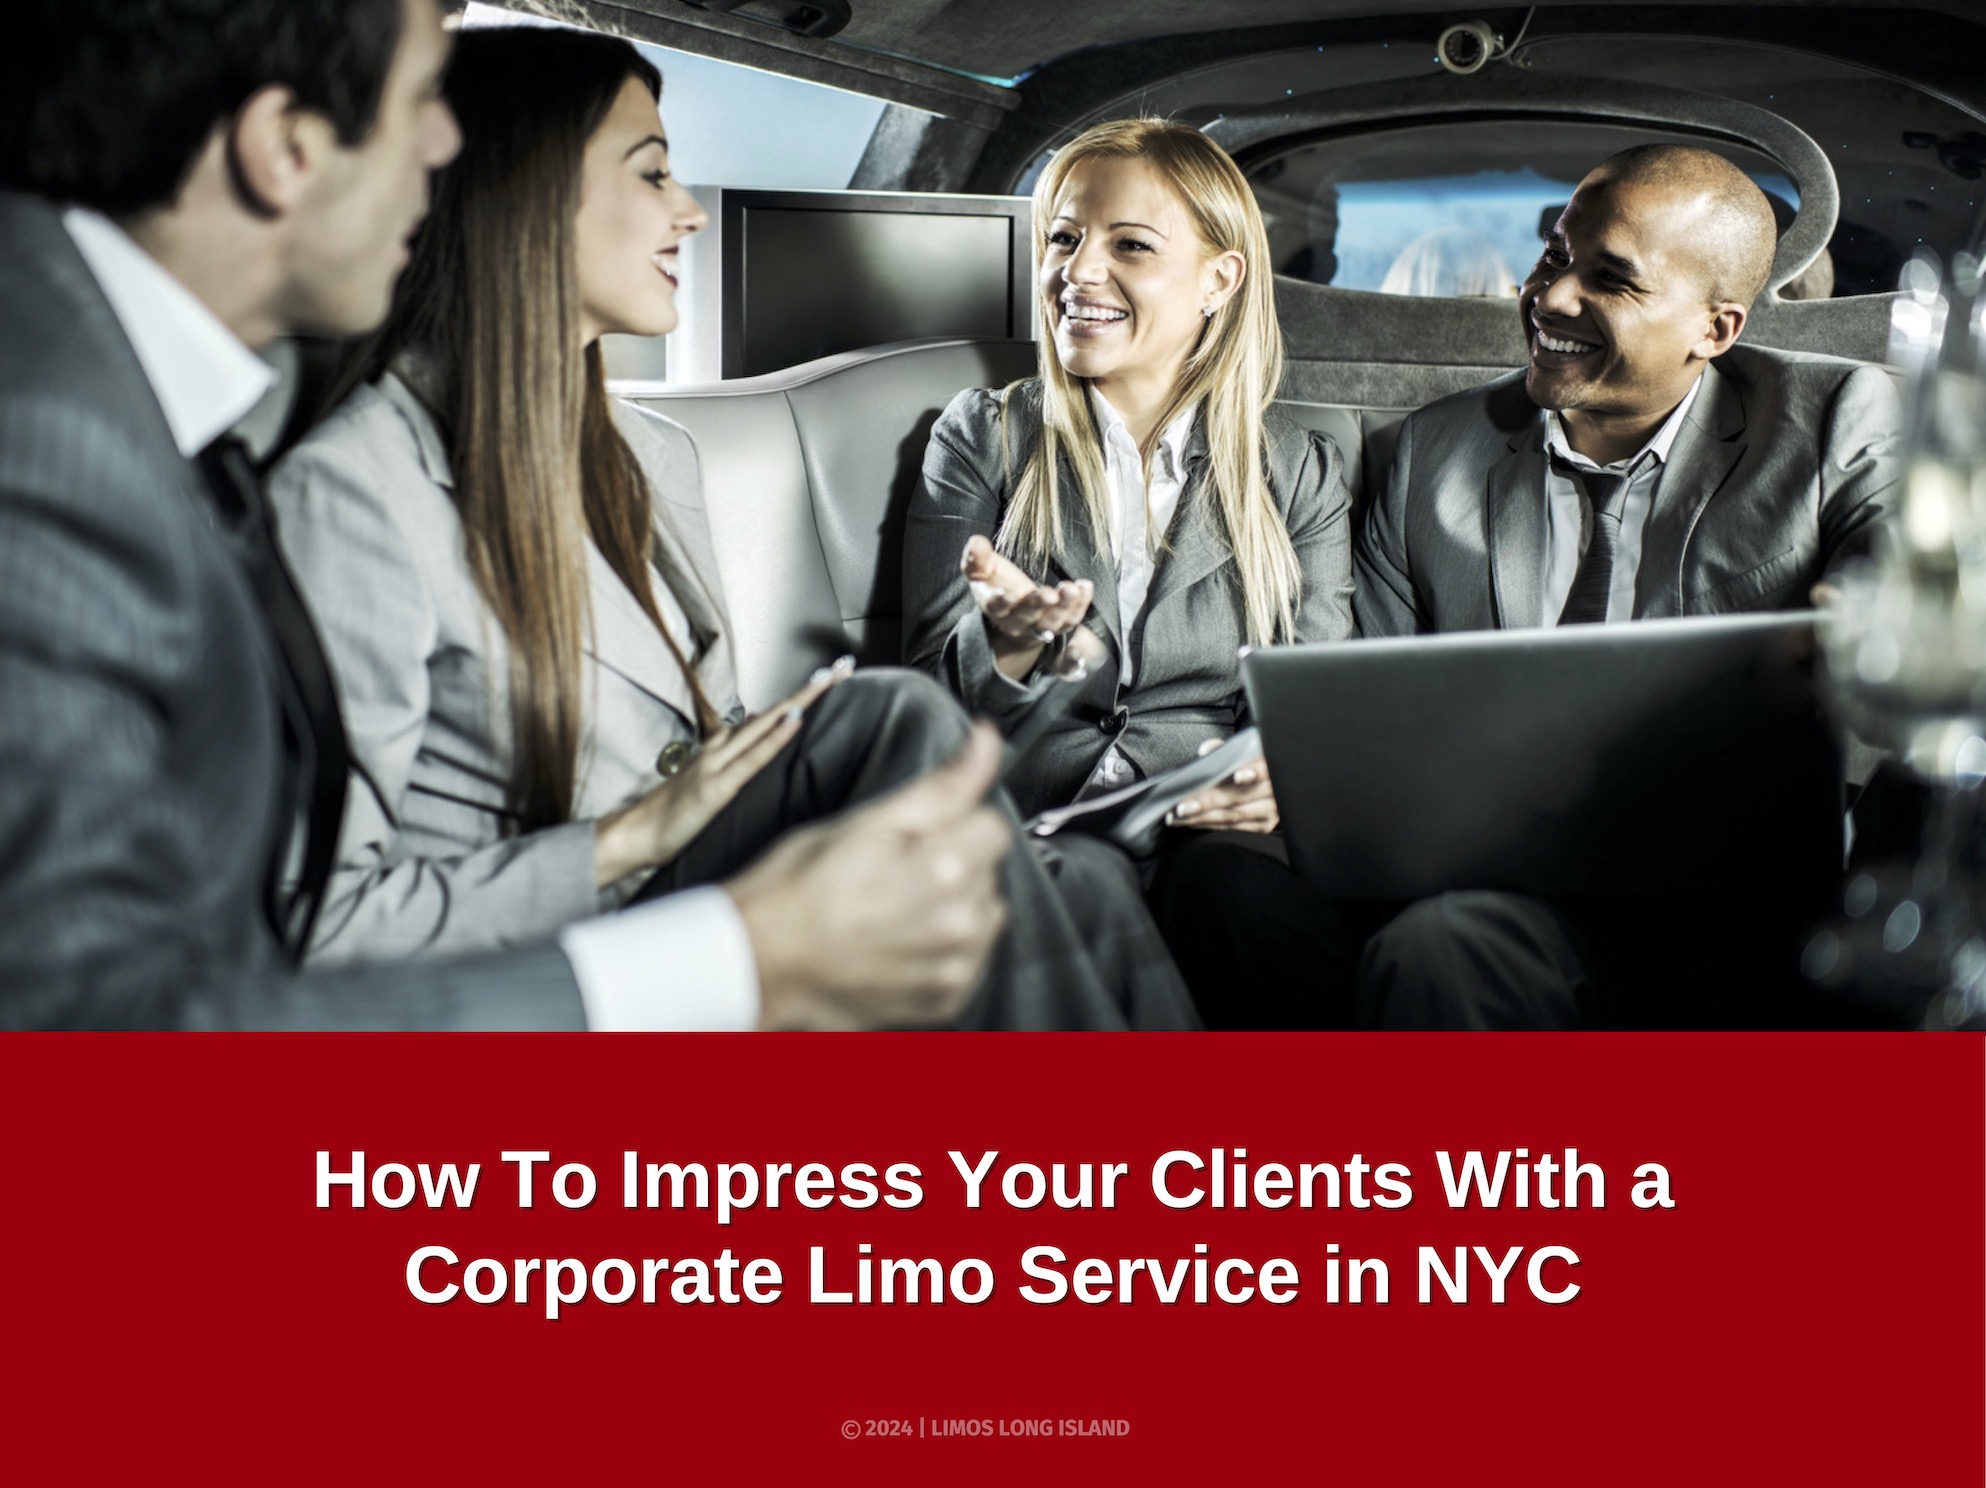 Impress Your Clients With a Corporate Limo Service in NYC